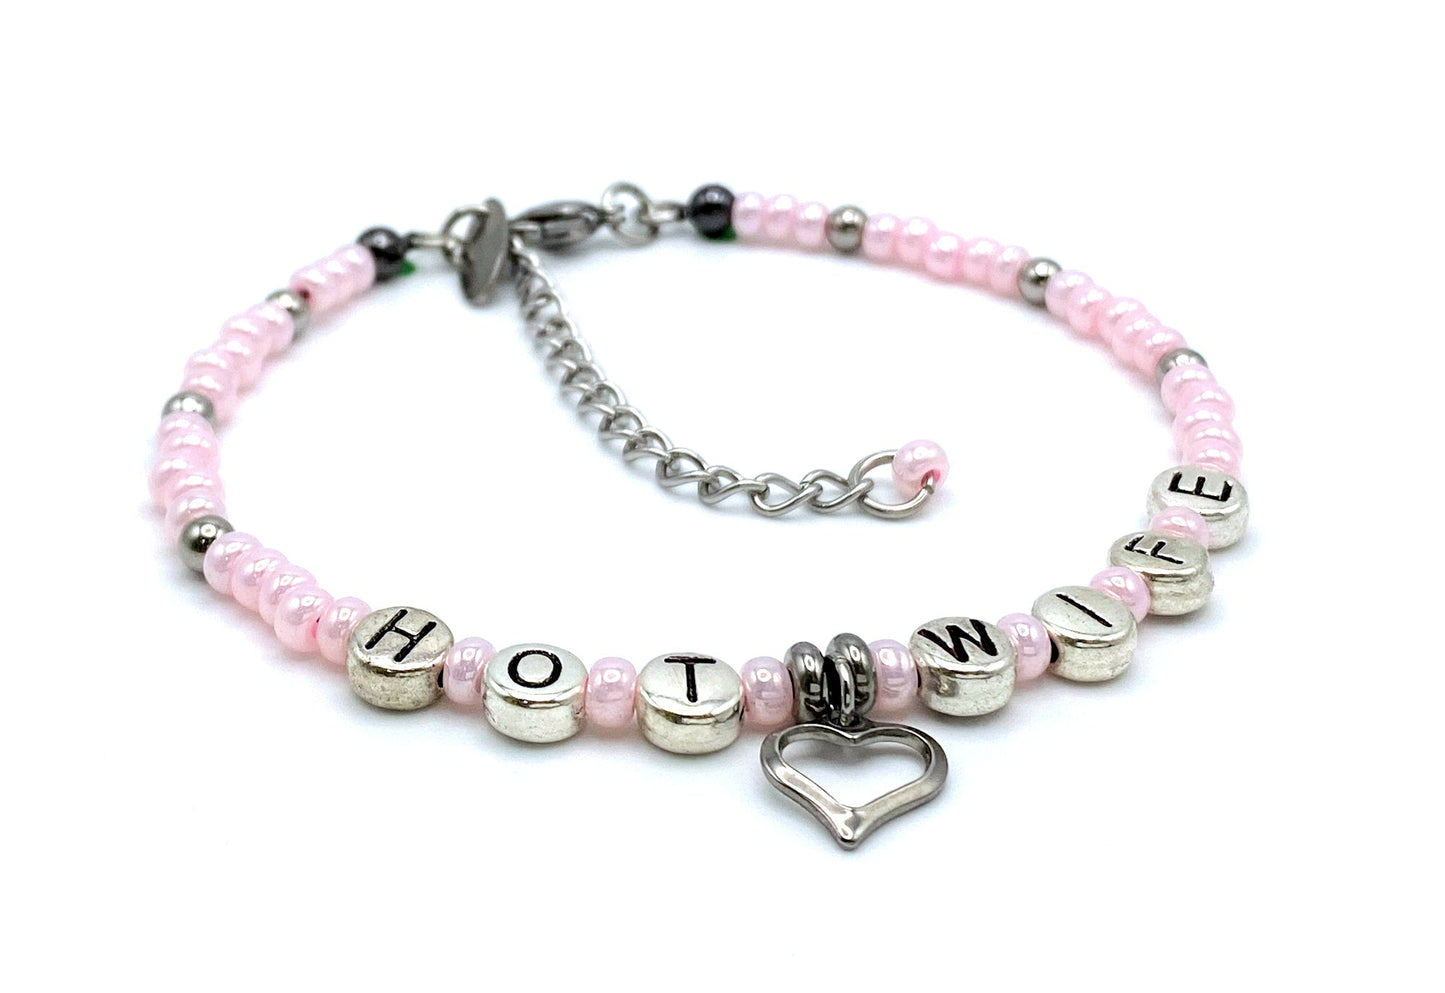 Hotwife Anklet / Bracelet with Heart Charm